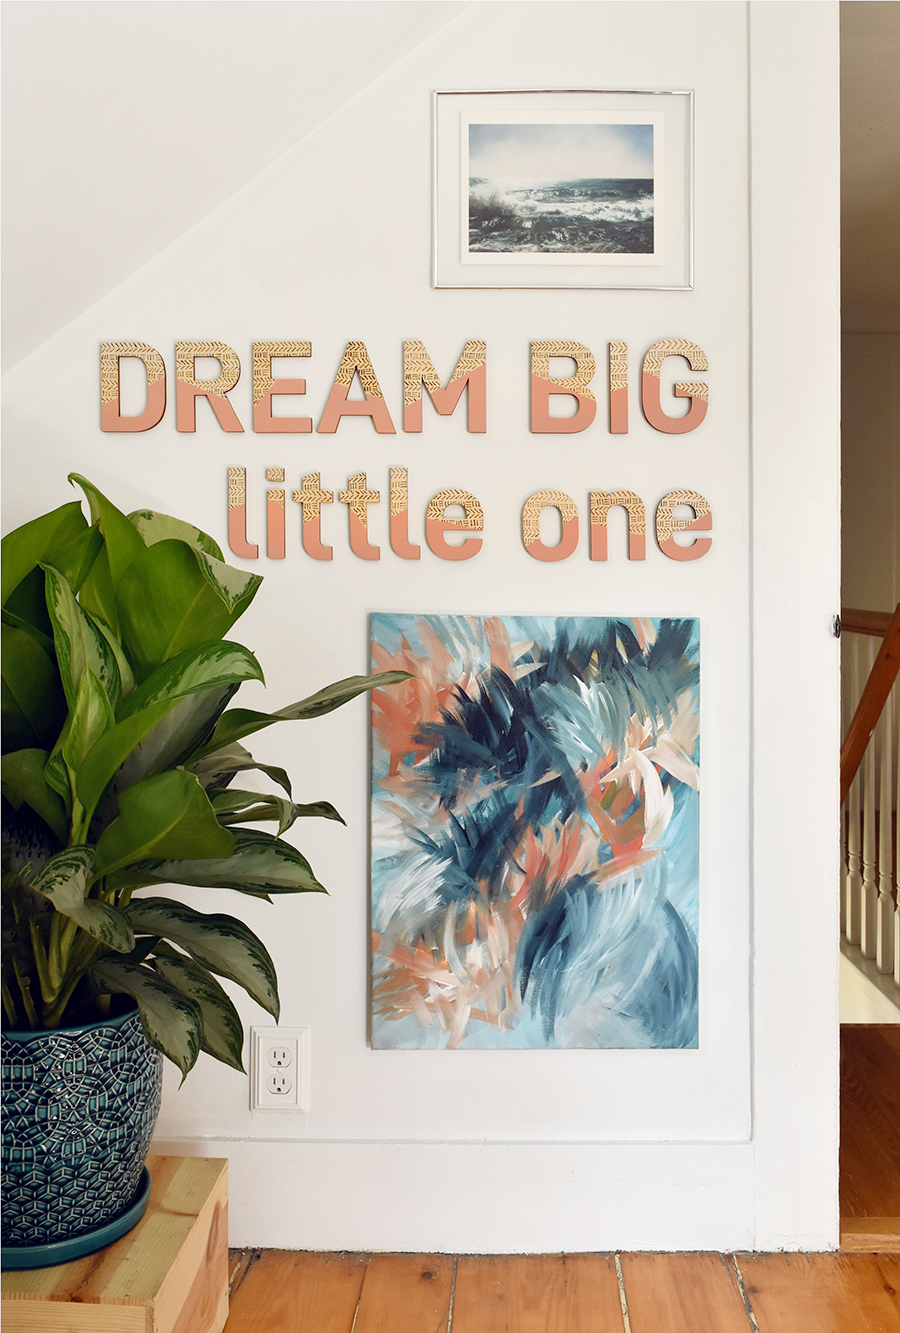 DIY Color Block Wall Art Quote With Mud Cloth Style Details... Make your own cute wall art quote for your baby's nursery! /// By Design Fixation "Dream big little one" #colorblock #mudcloth #quote #wall_art #baby